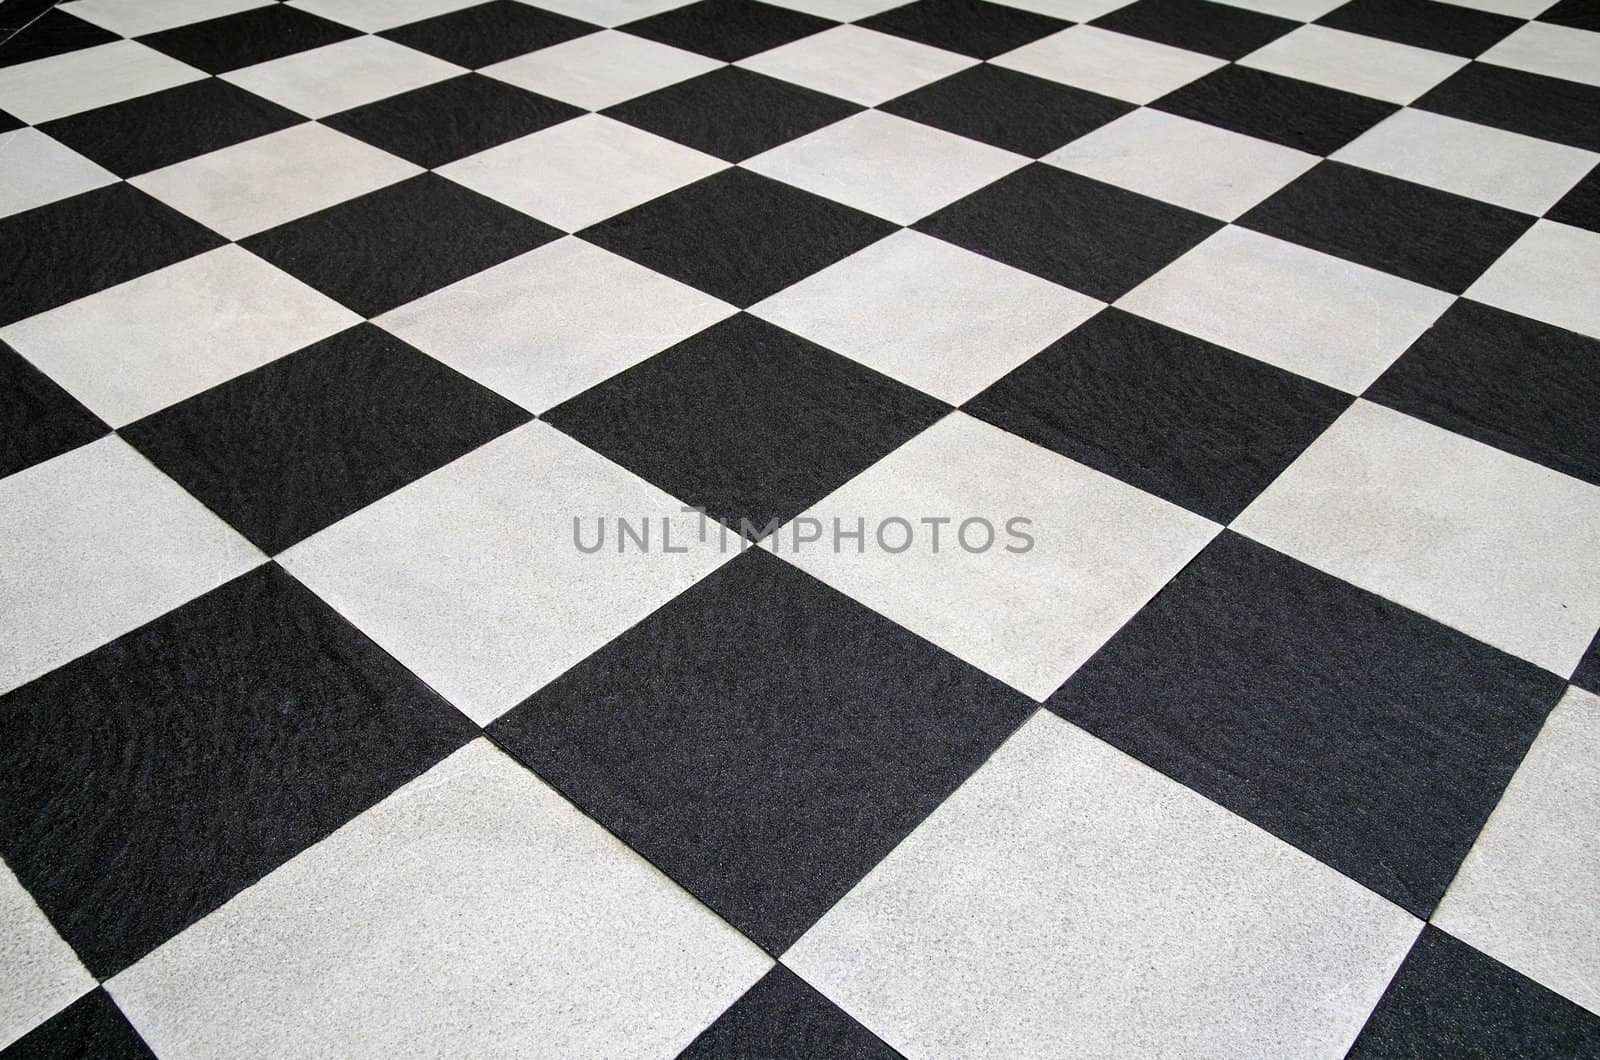 Perspective of Square black and white tiles floor